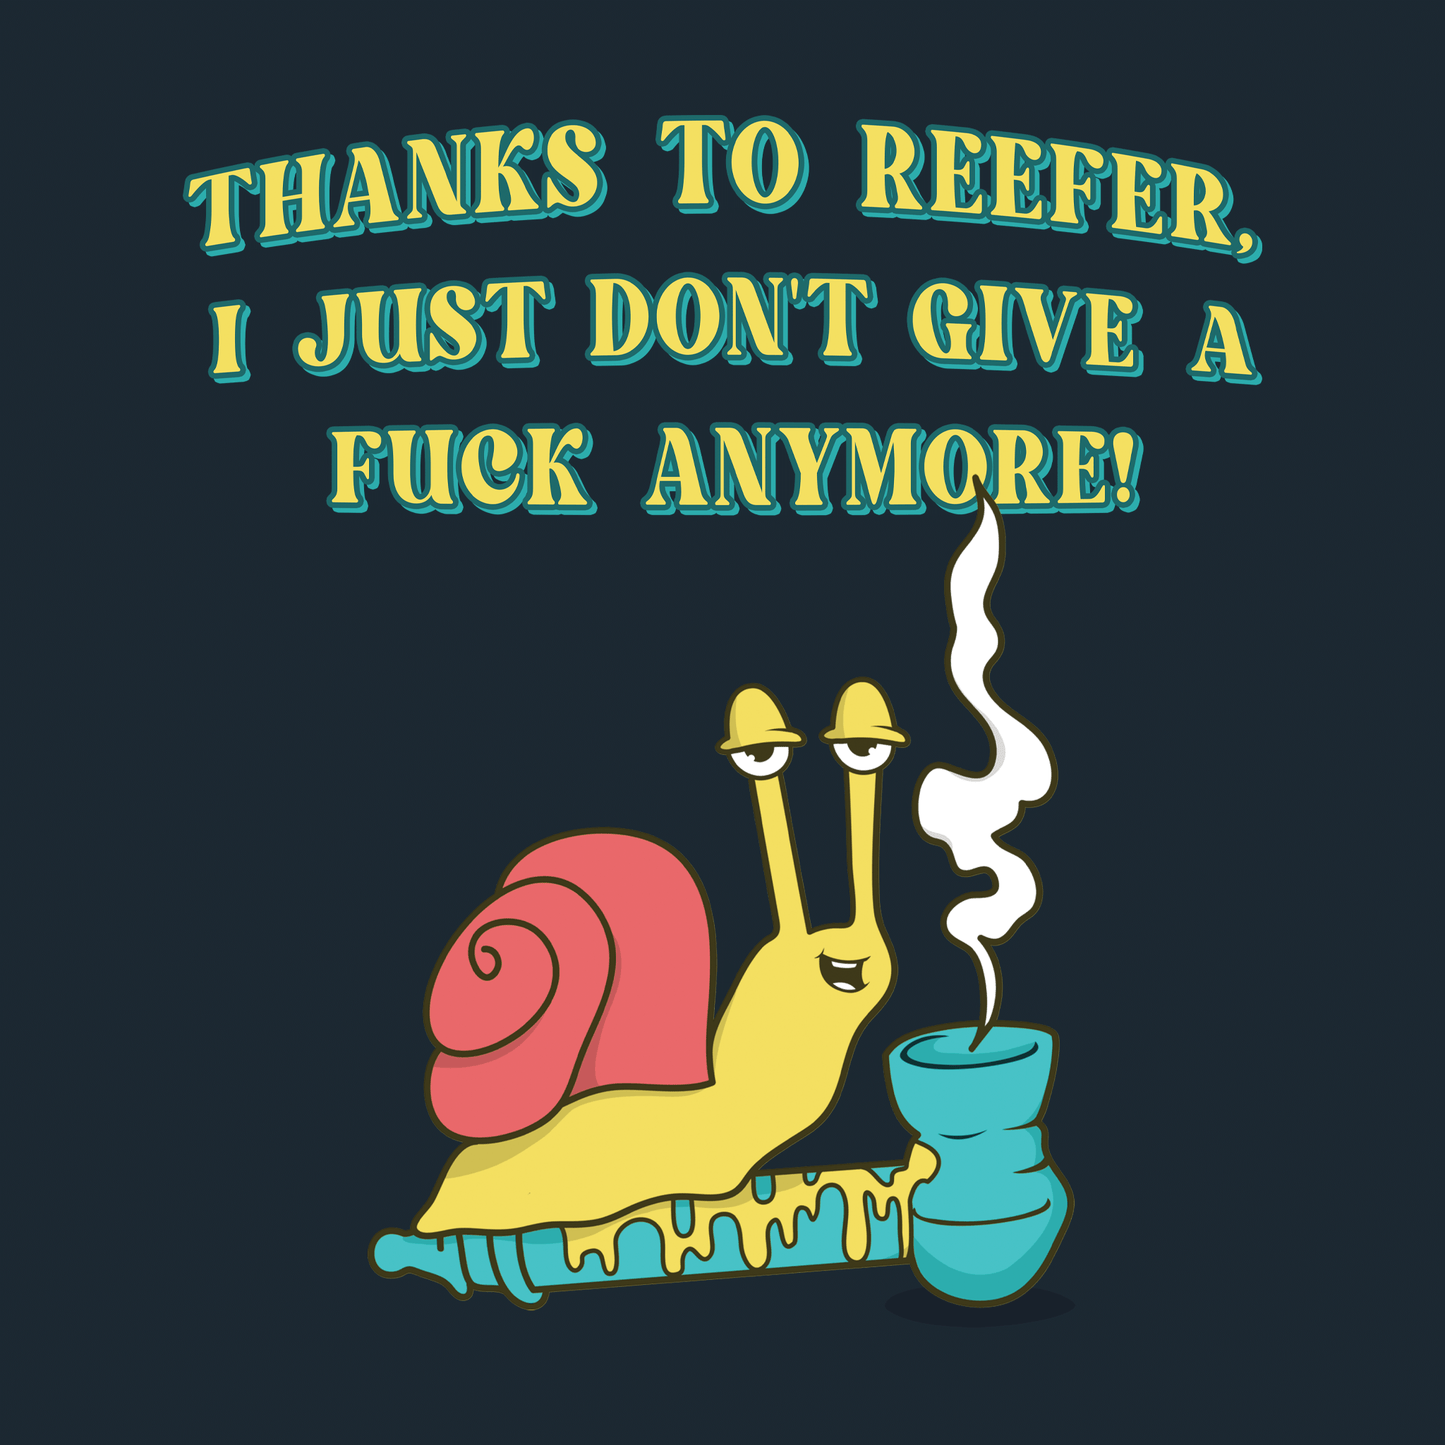 Thanks To Reefer T-Shirt